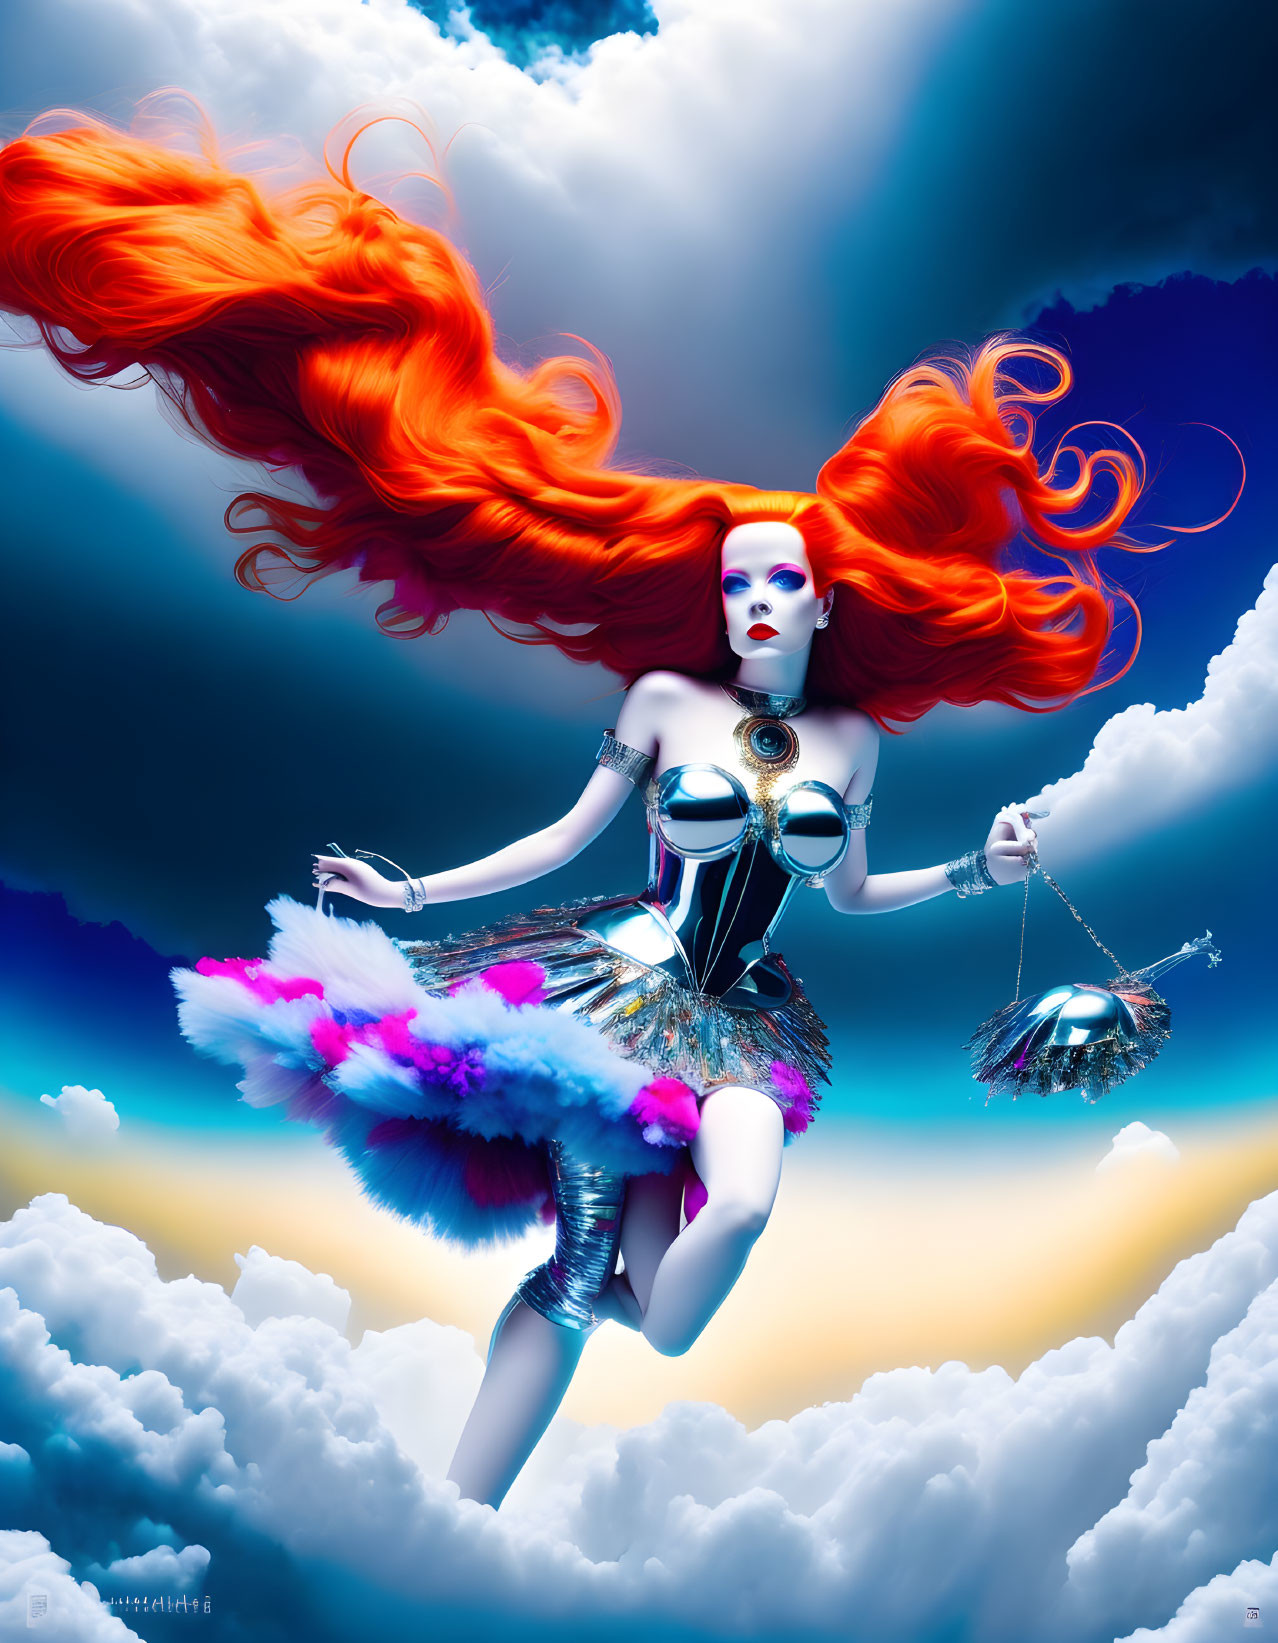 Surreal image: Woman with red hair in clouds with whimsical outfit.